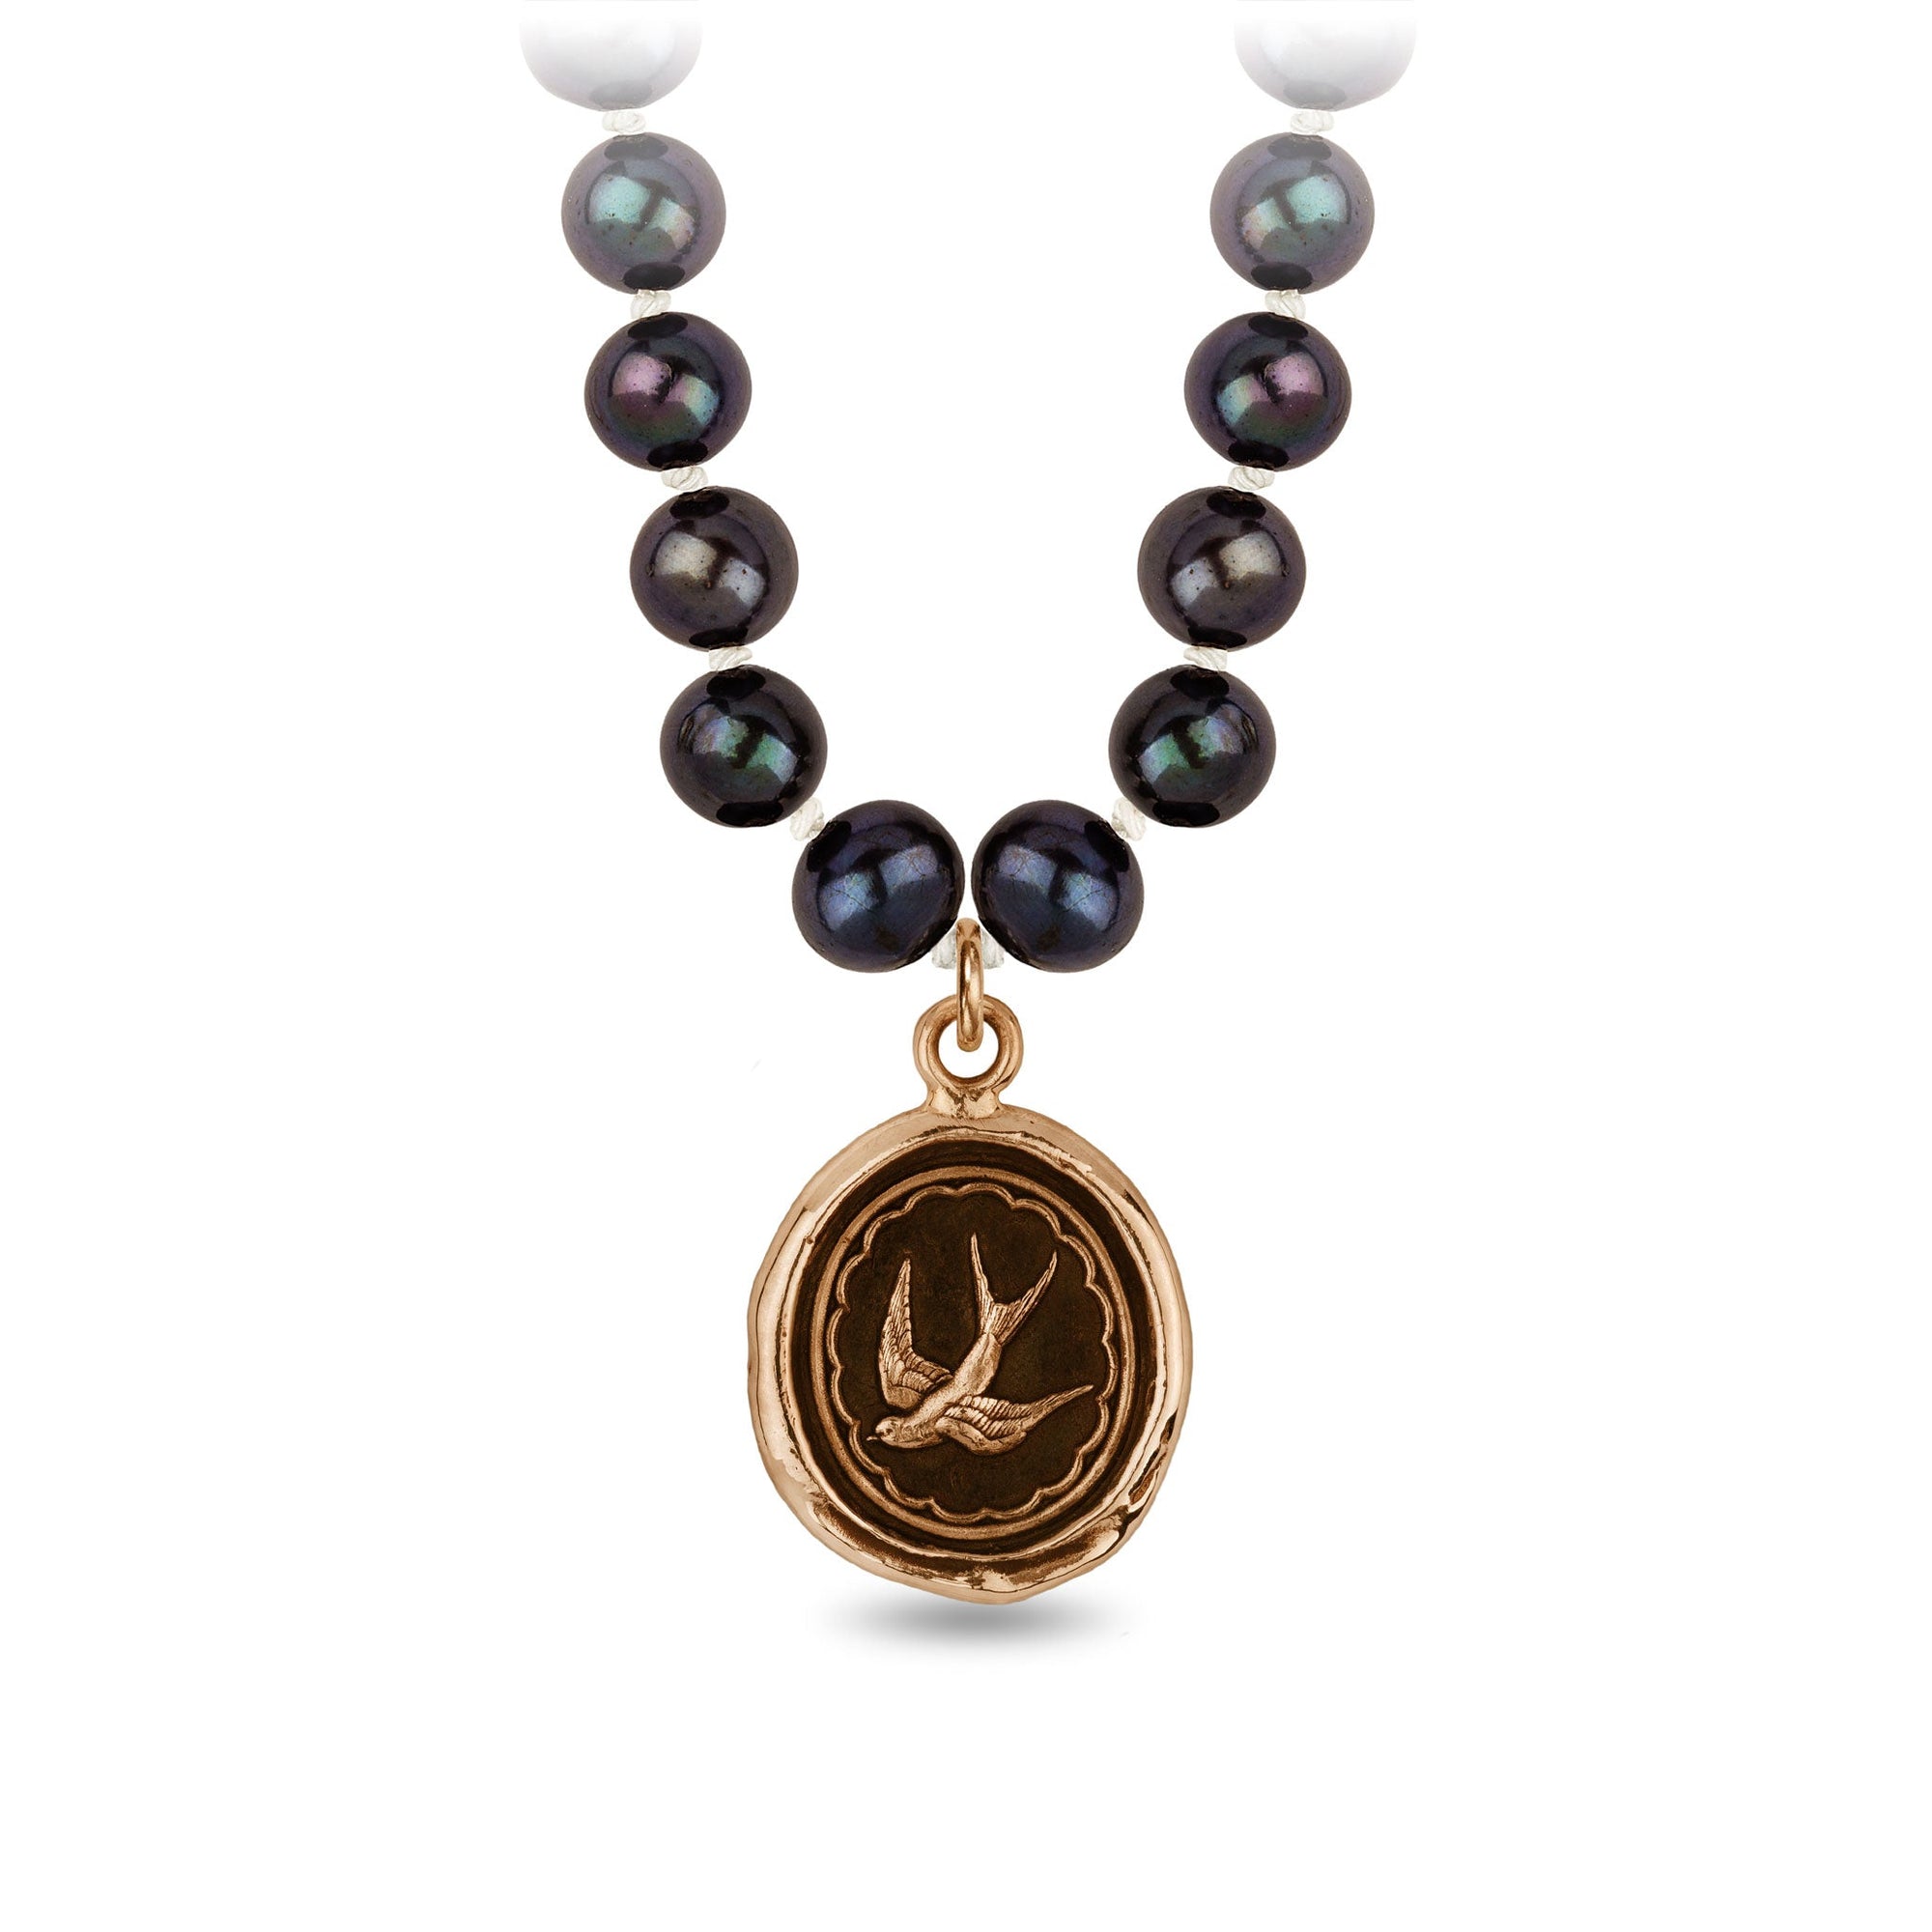 Pyrrha Free Spirited Knotted Pearl Necklace - Black